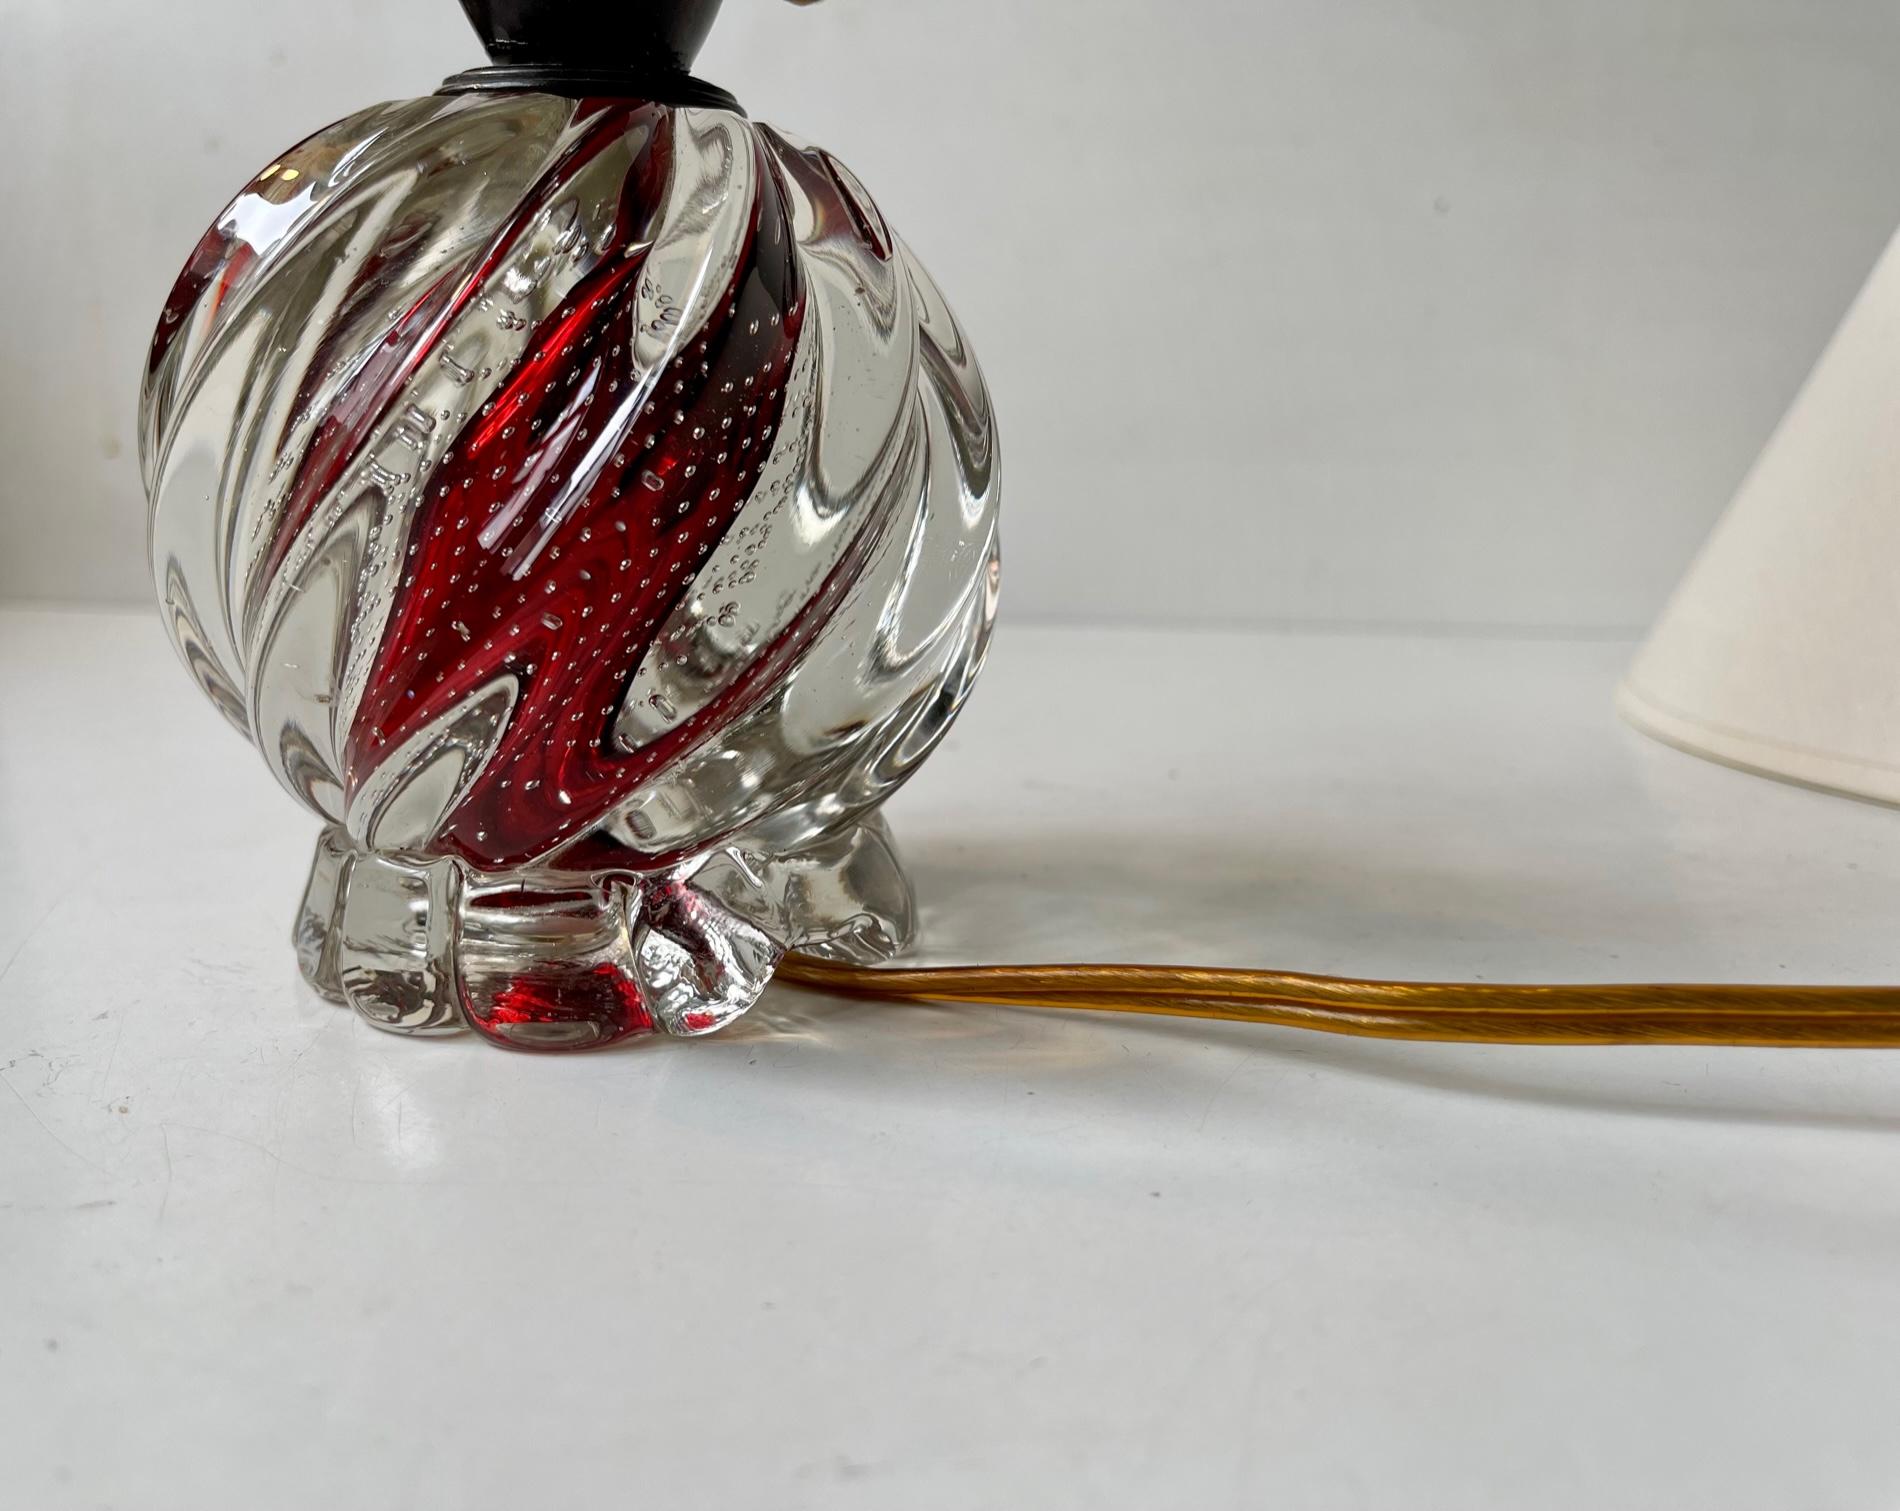 Mid-Century Modern Small Murano Table Lamp in Twisted Glass with Internal Air-Bubbles, 1950s For Sale